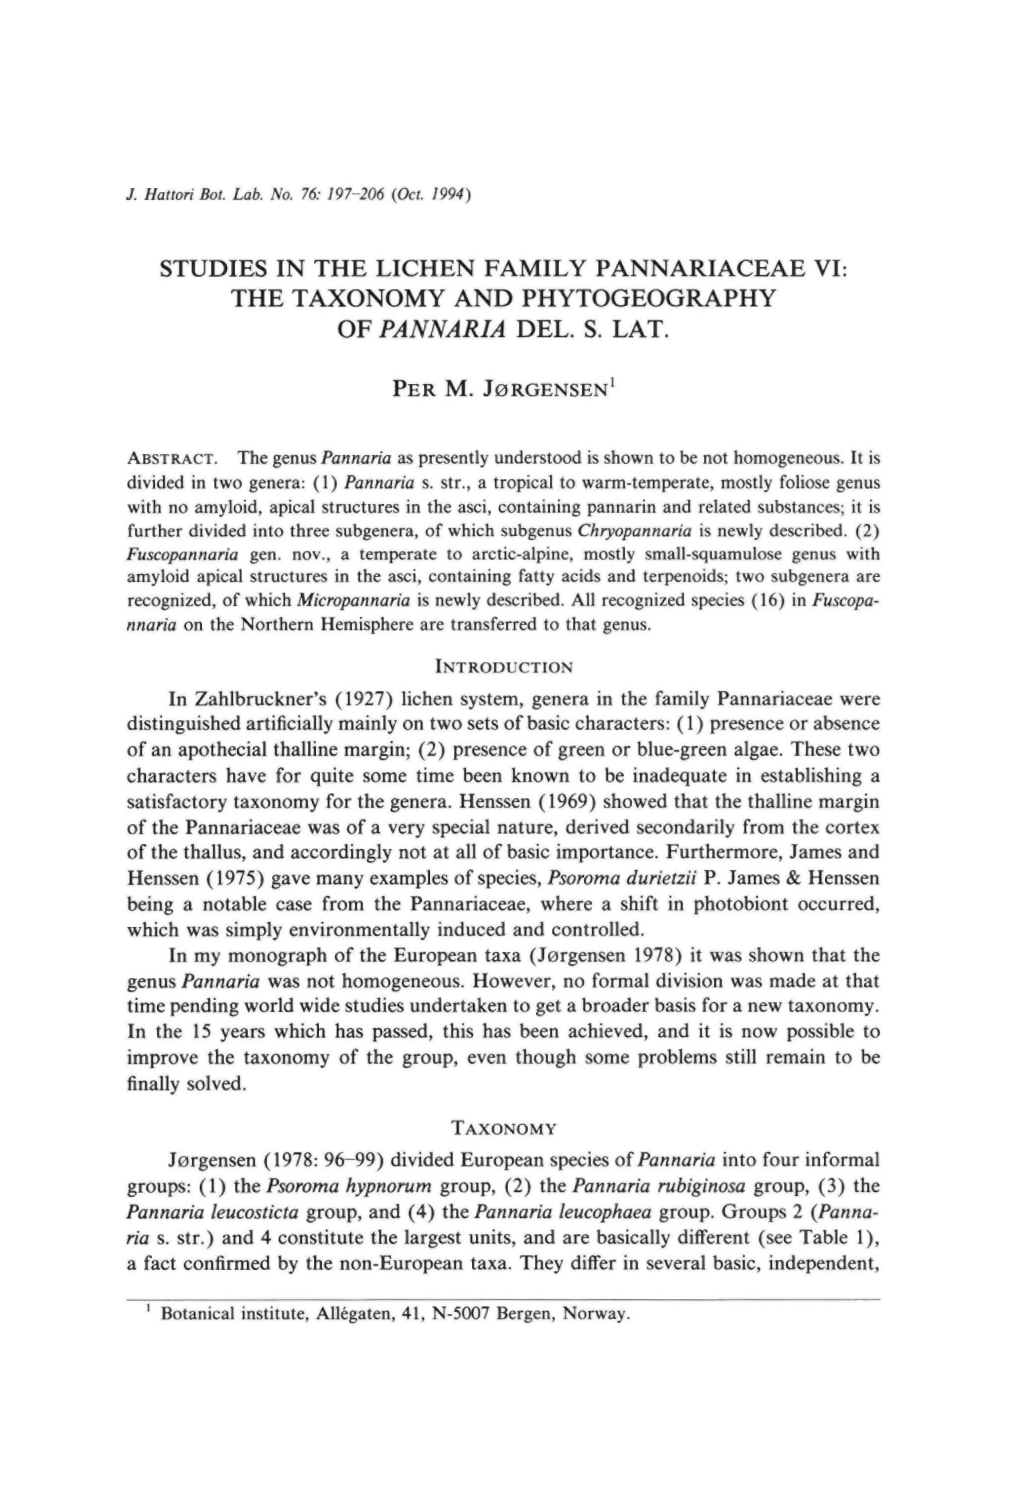 Studies in the Lichen Family Pannariaceae Vi: the Taxonomy and Phytogeography of Pannaria Del